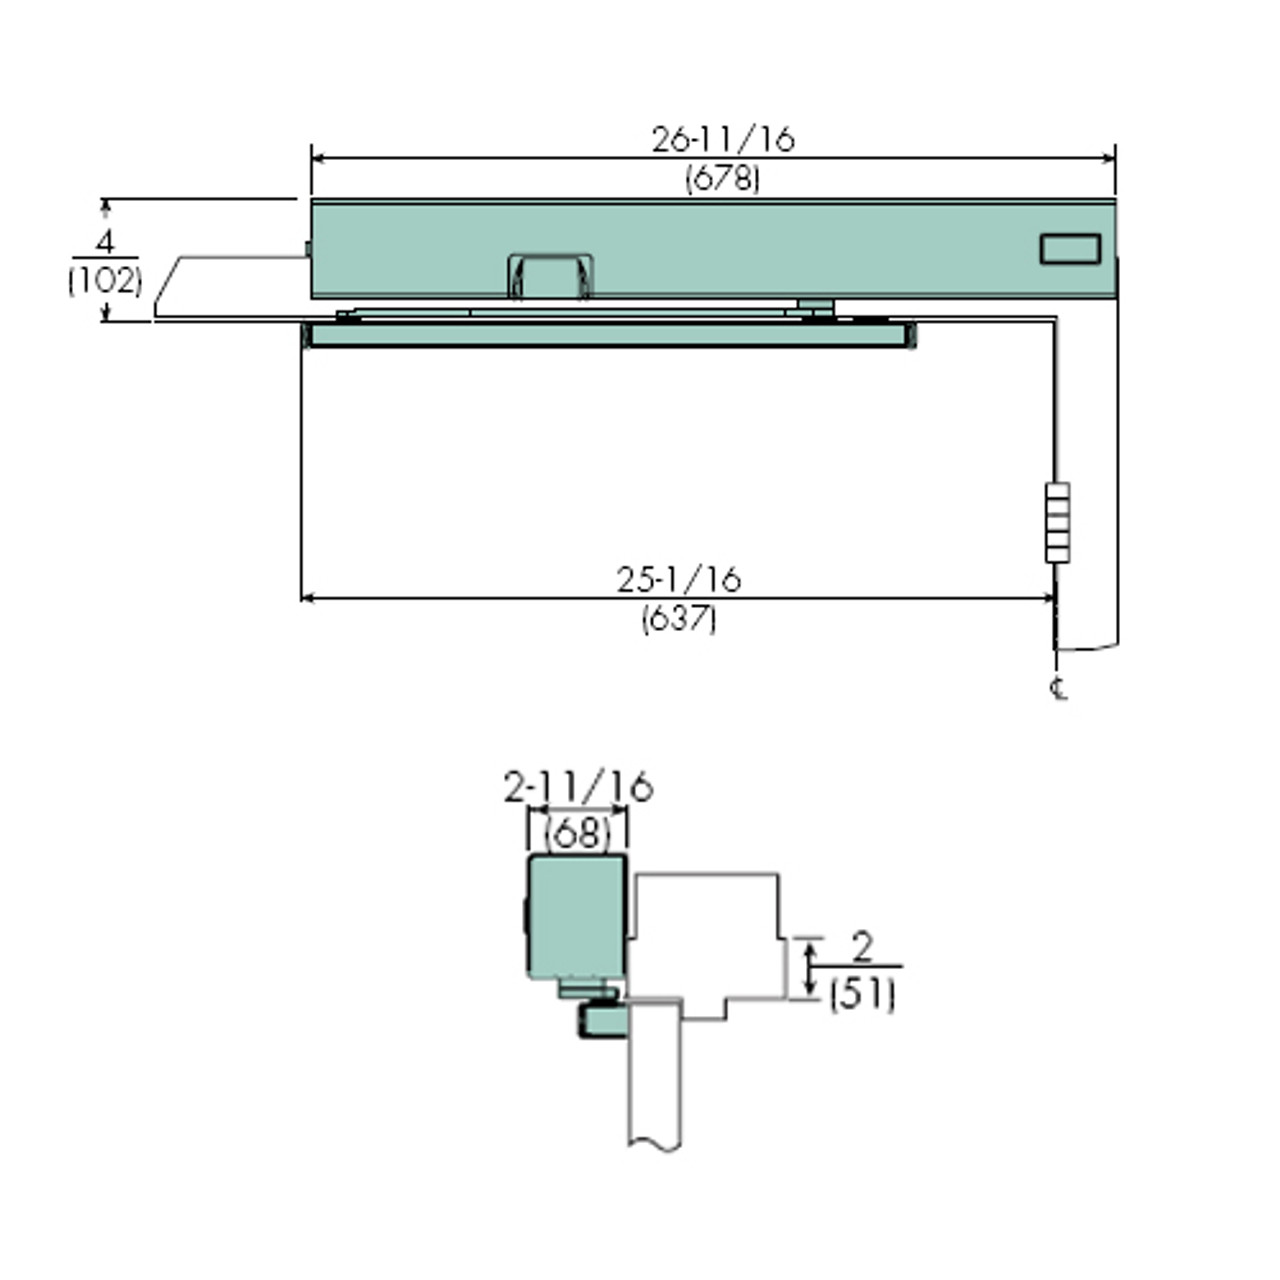 7153SZ-RH-120VAC-691 Norton 7100SZ Series Safe Zone Multi-Point Closer/Holder with Motion Sensor and Pull Side Double Egress Arm and Slide Track in Dull Bronze Finish